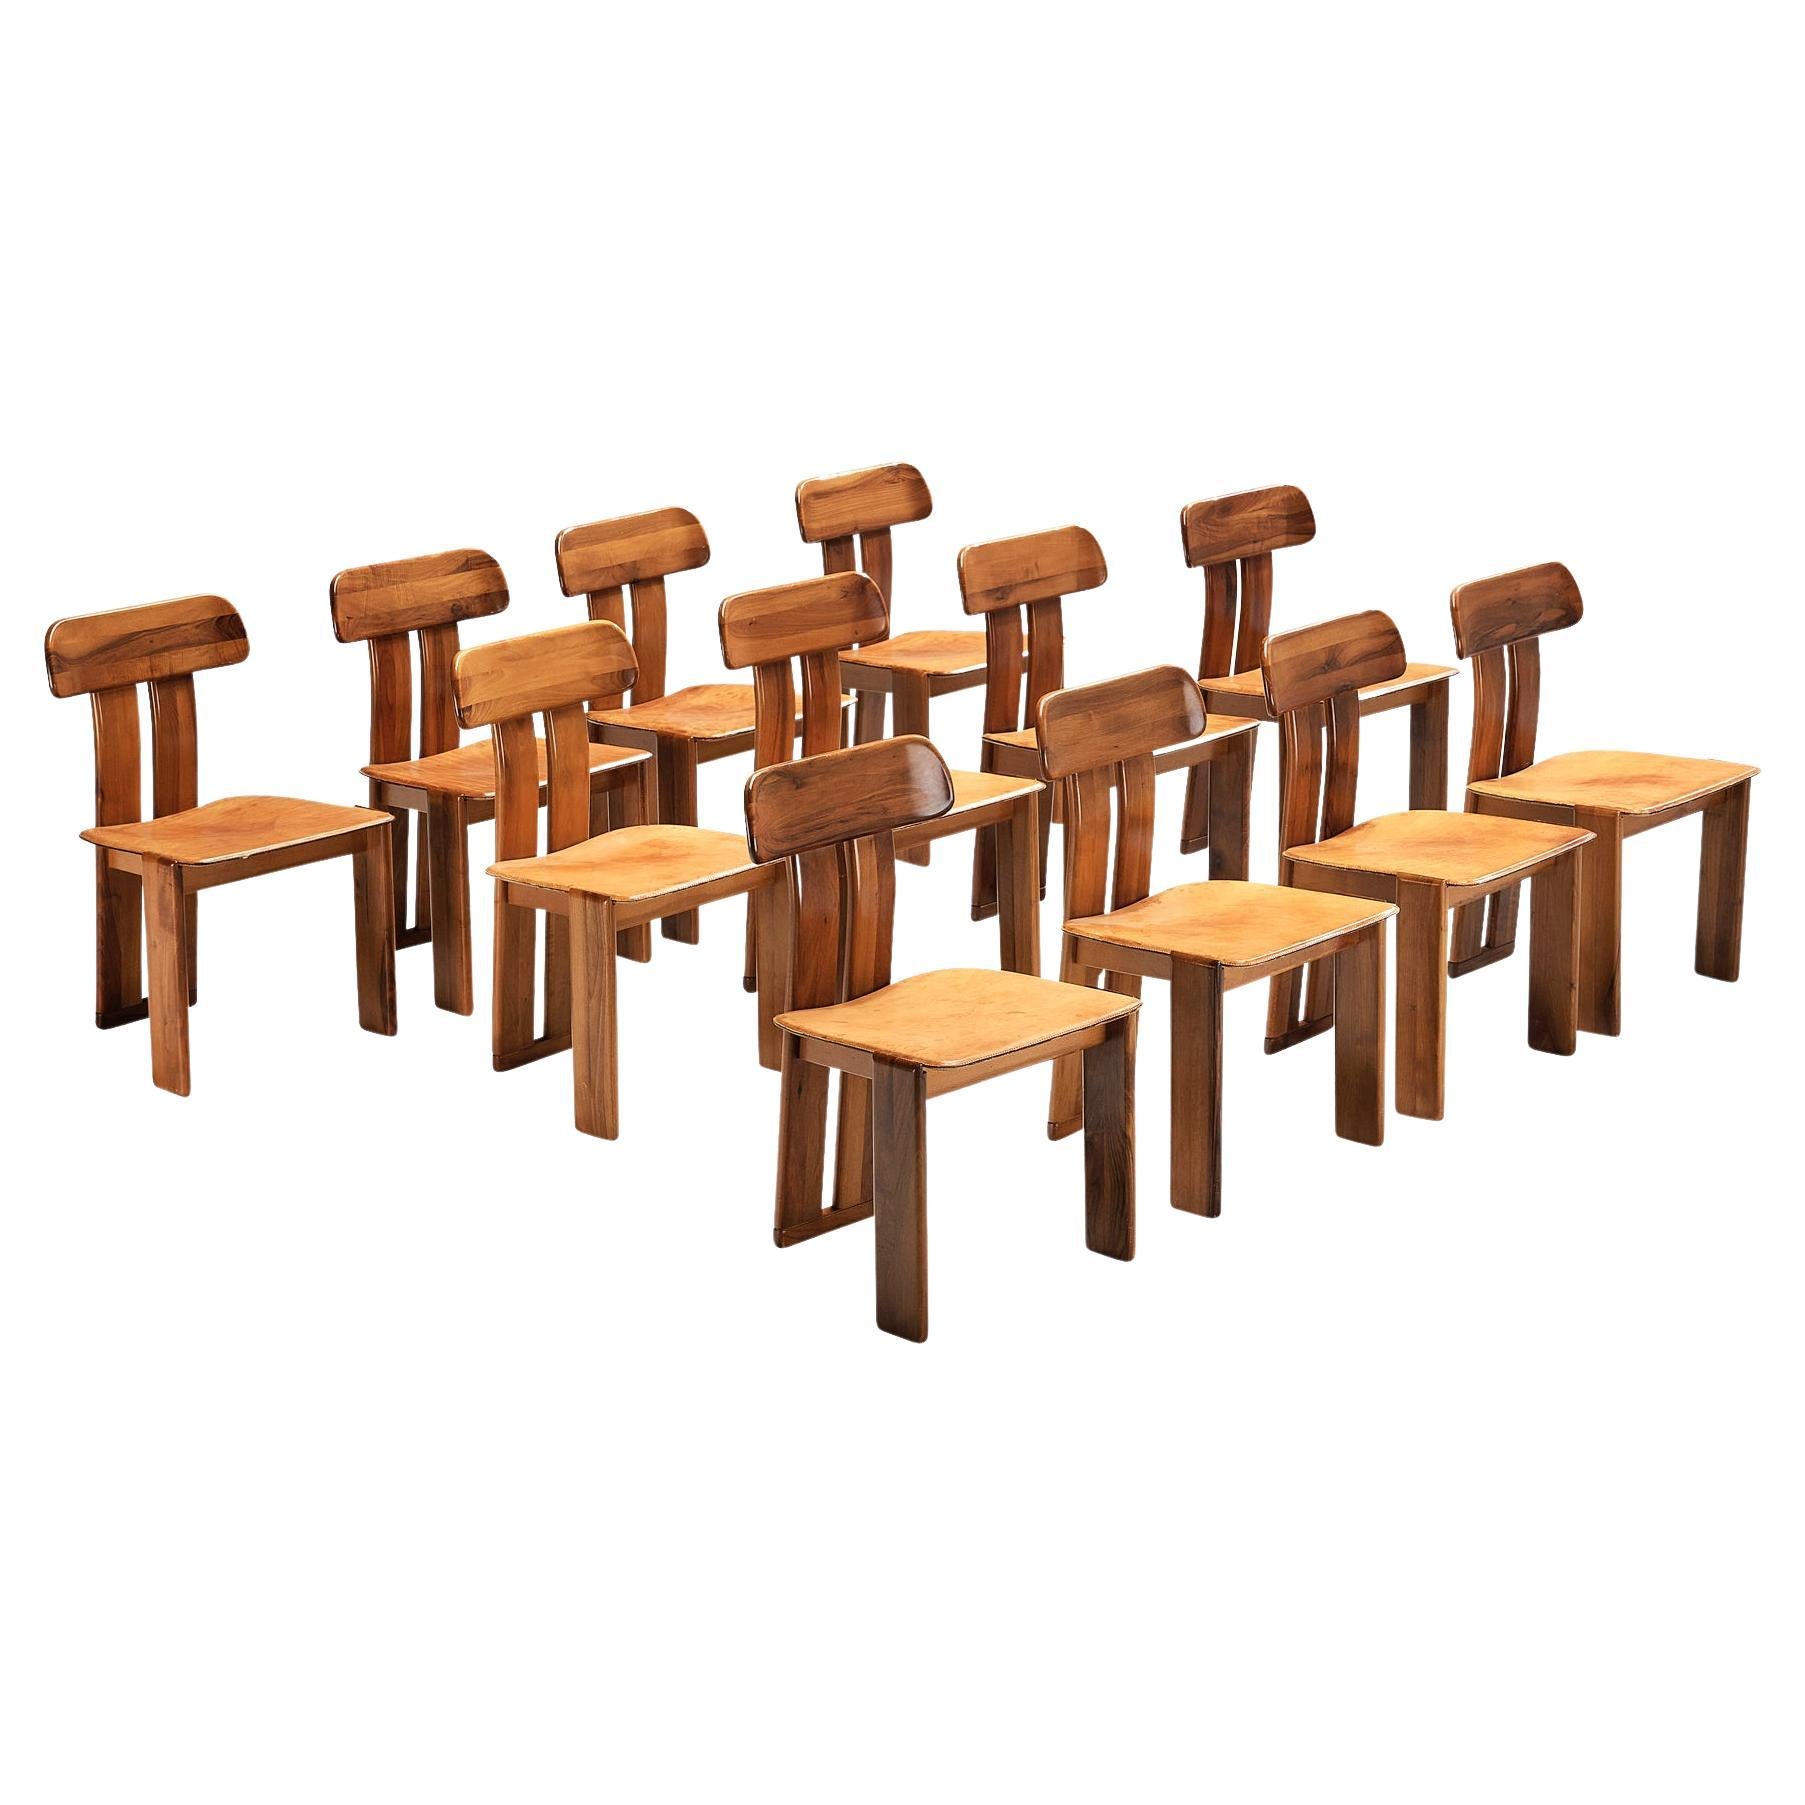 Mario Marenco for Mobil Girgi Set of Twelve ‘Sapporo’ Dining Chairs in Walnut